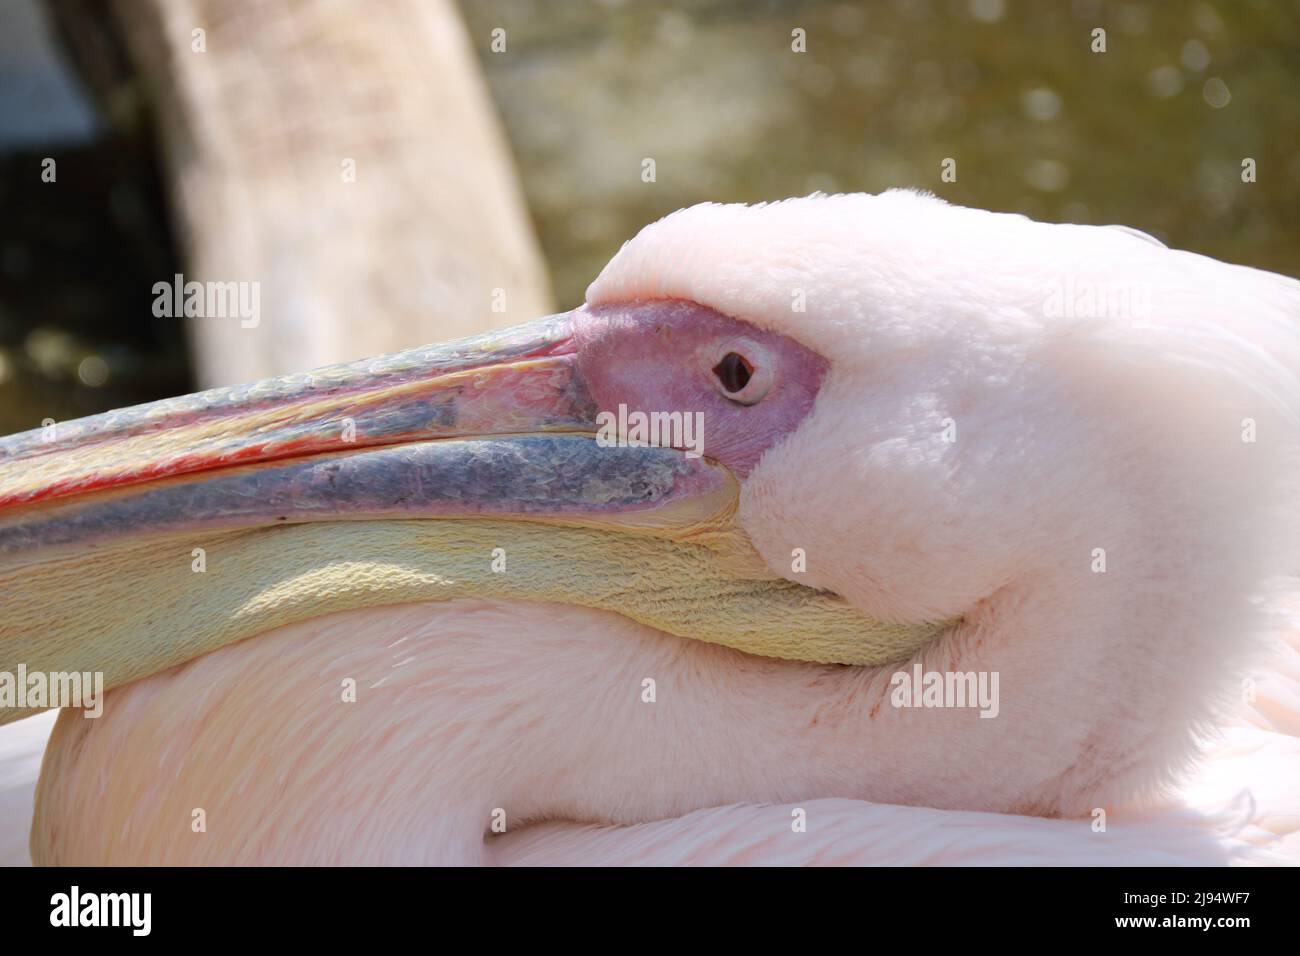 Head of a flamingo photographed from the side Stock Photo